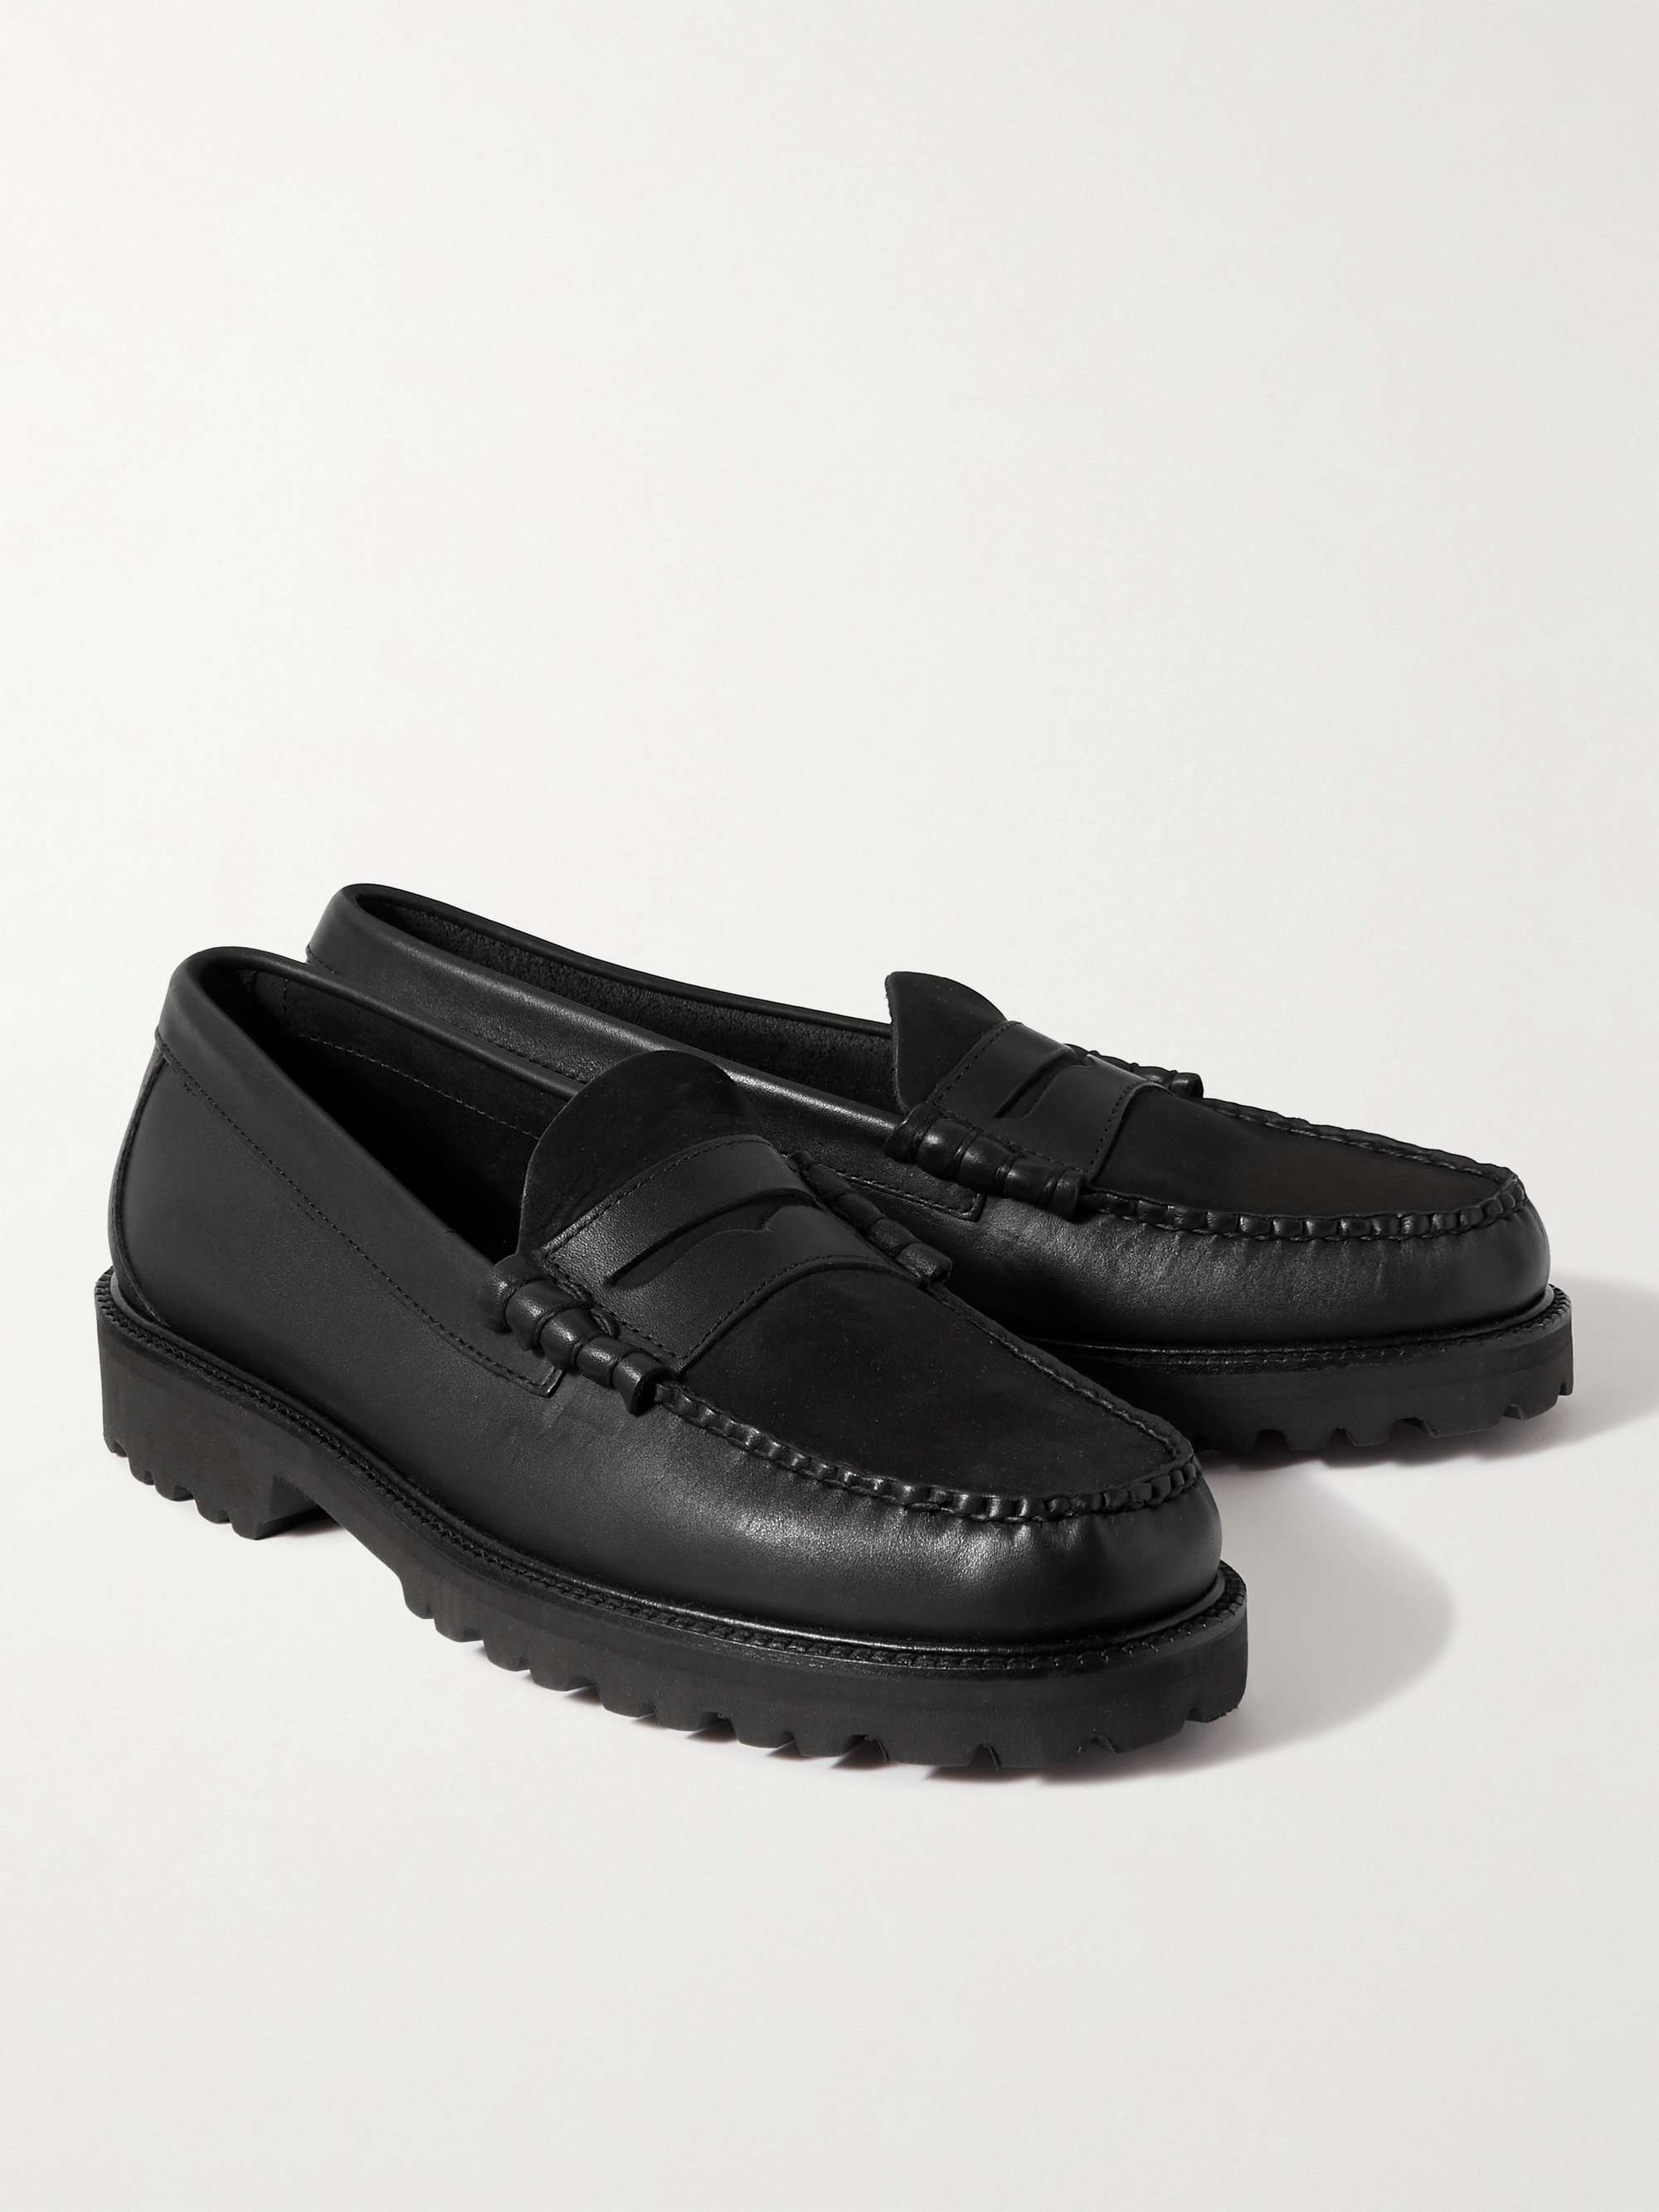 G.H. BASS & CO. Weejun 90 Larson Leather Penny Loafers for Men | MR PORTER